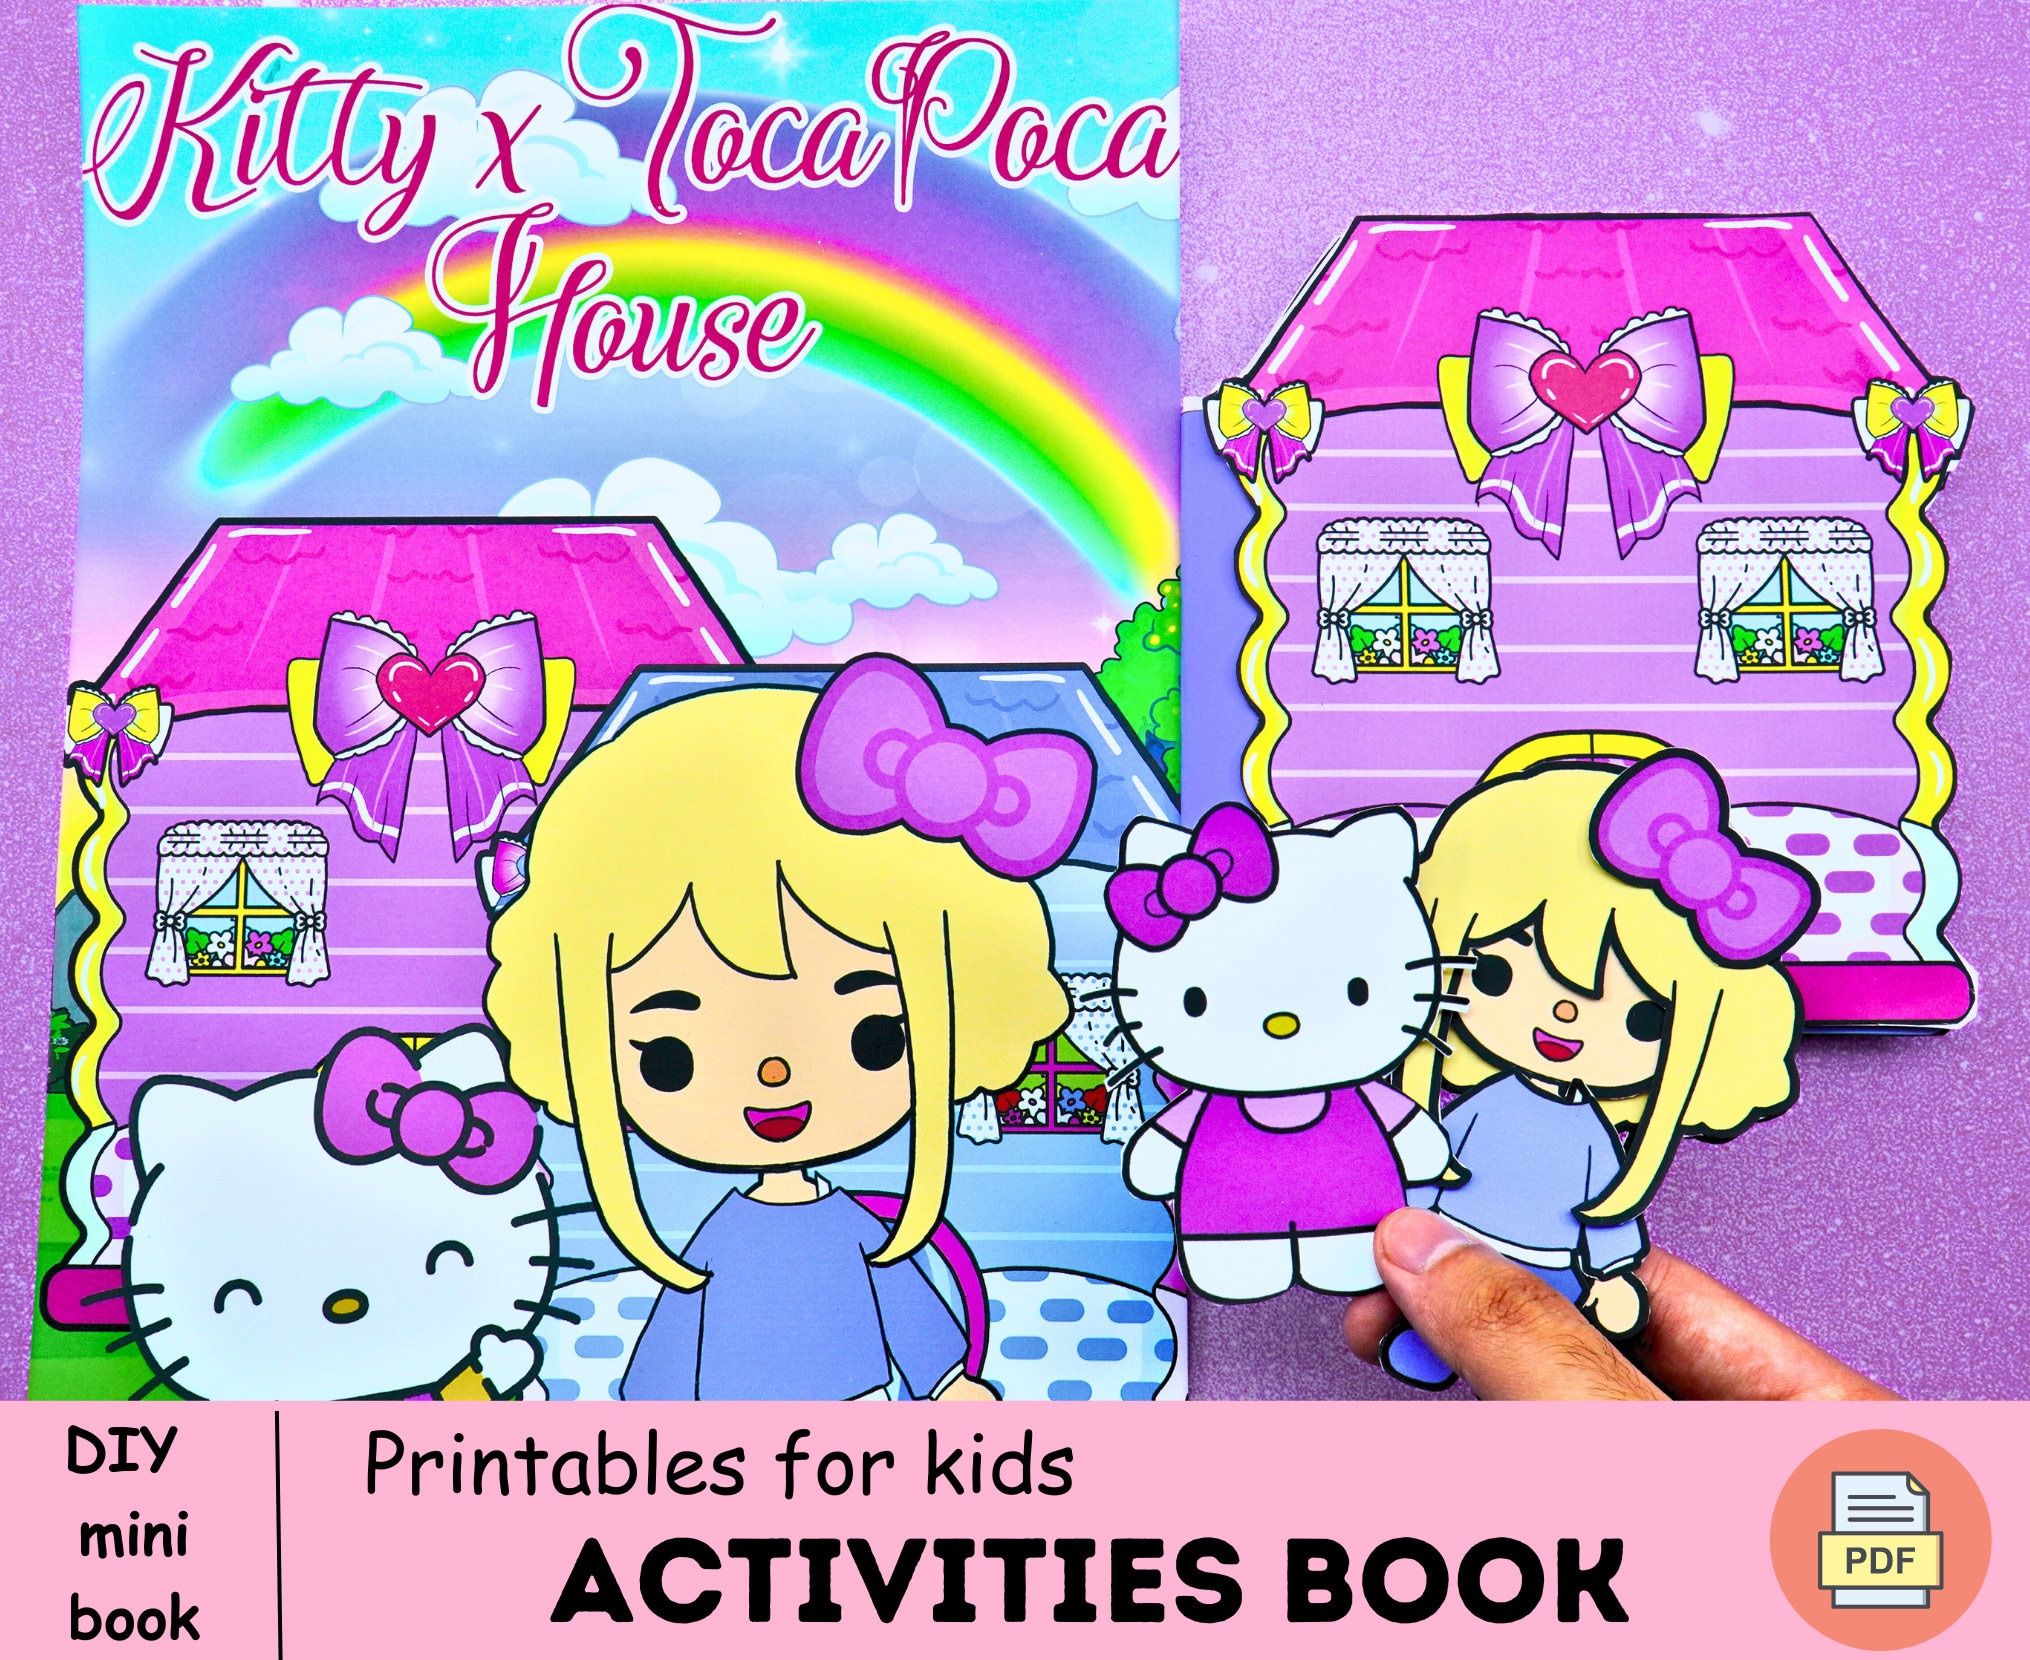 Pretty Toca boca paper dollhouse printable 🌈Toca Boca papercraft |  Printable Paper Doll | Activtiy book digital products best seller 🎁 Woa  Doll Crafts